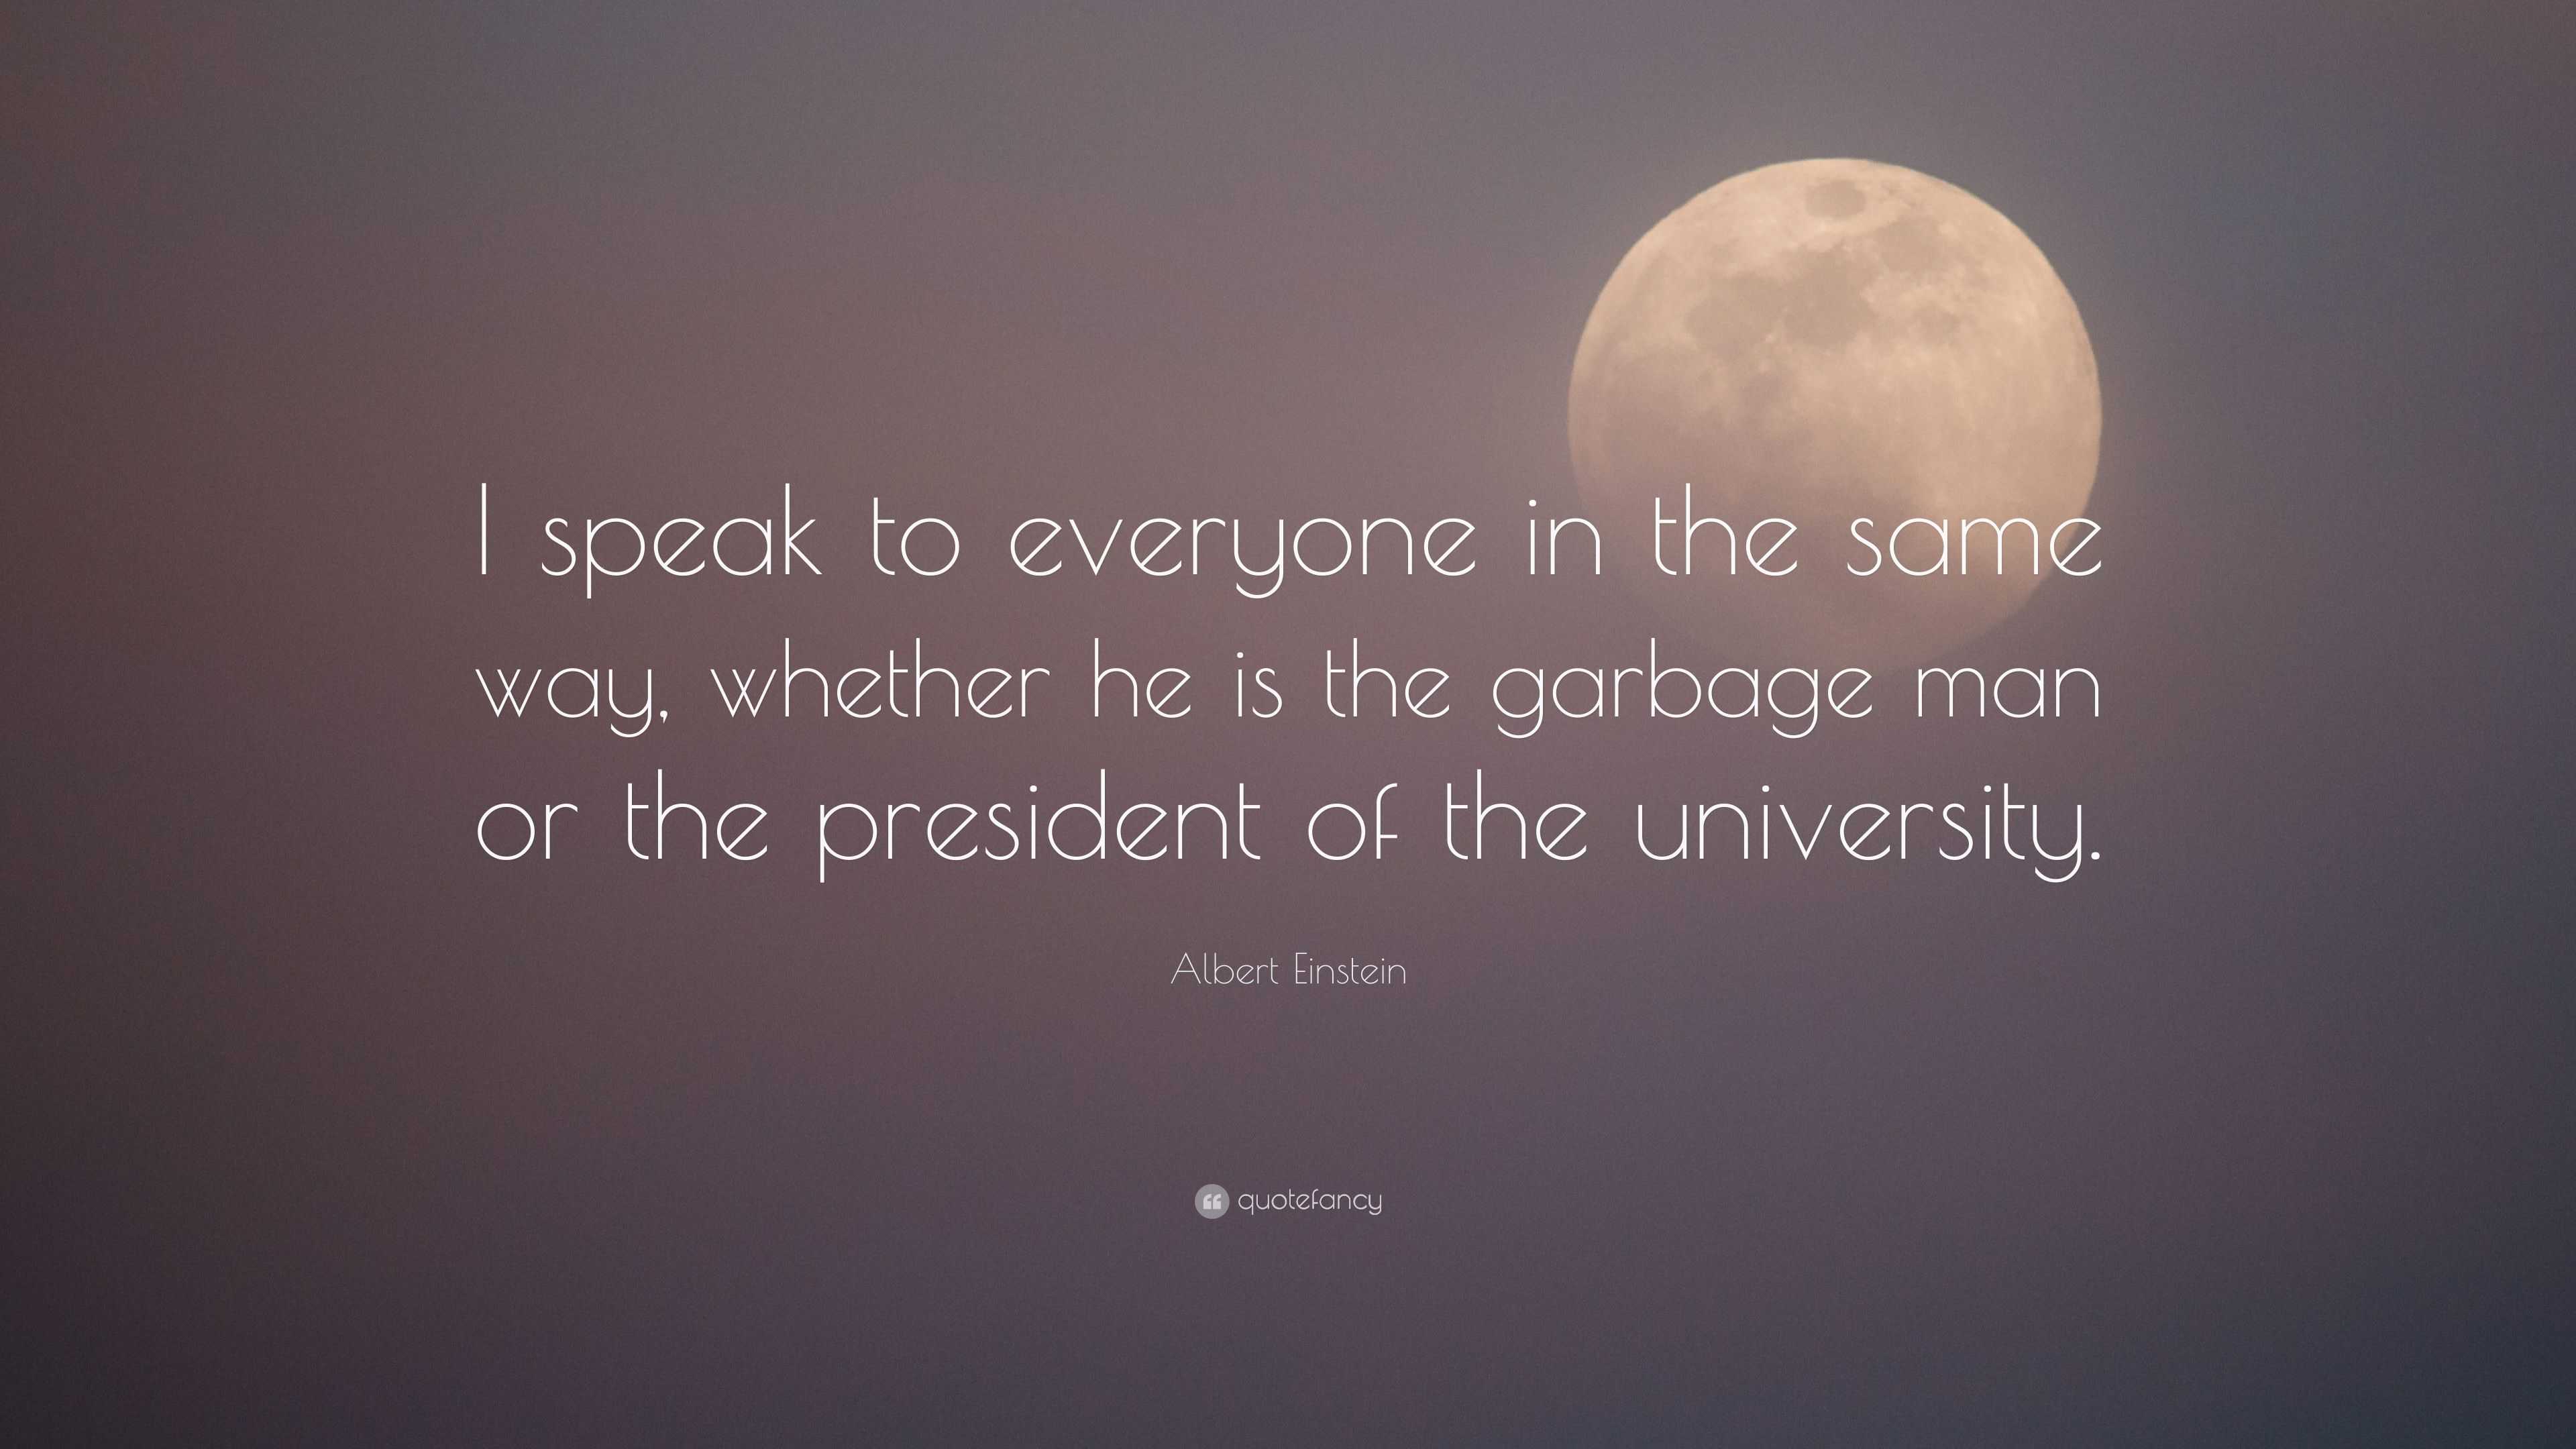 Albert Einstein Quote: "I speak to everyone in the same way, whether he is the garbage man or ...